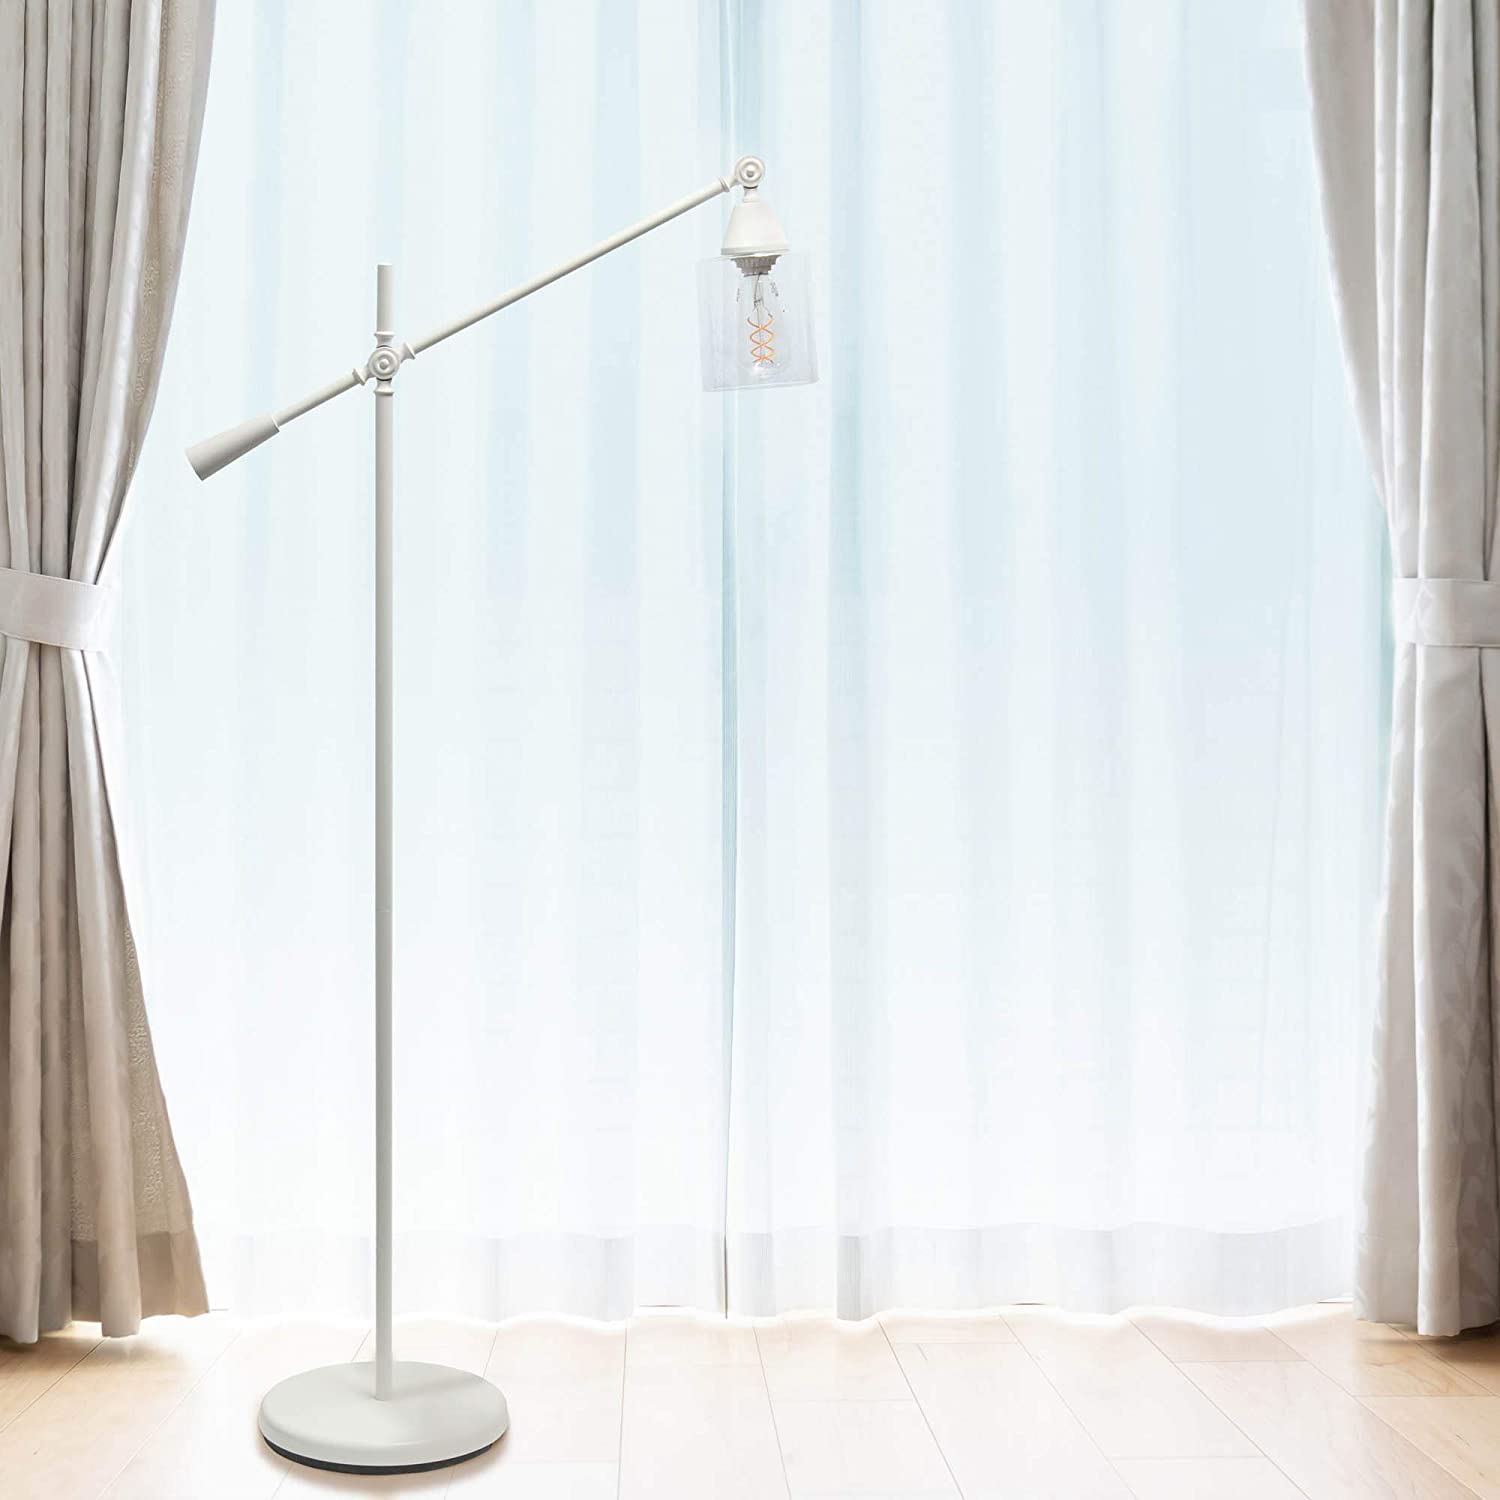 Lalia Home Decorative Swing Arm Floor Lamp with Clear Glass Cylindrical Shade, White